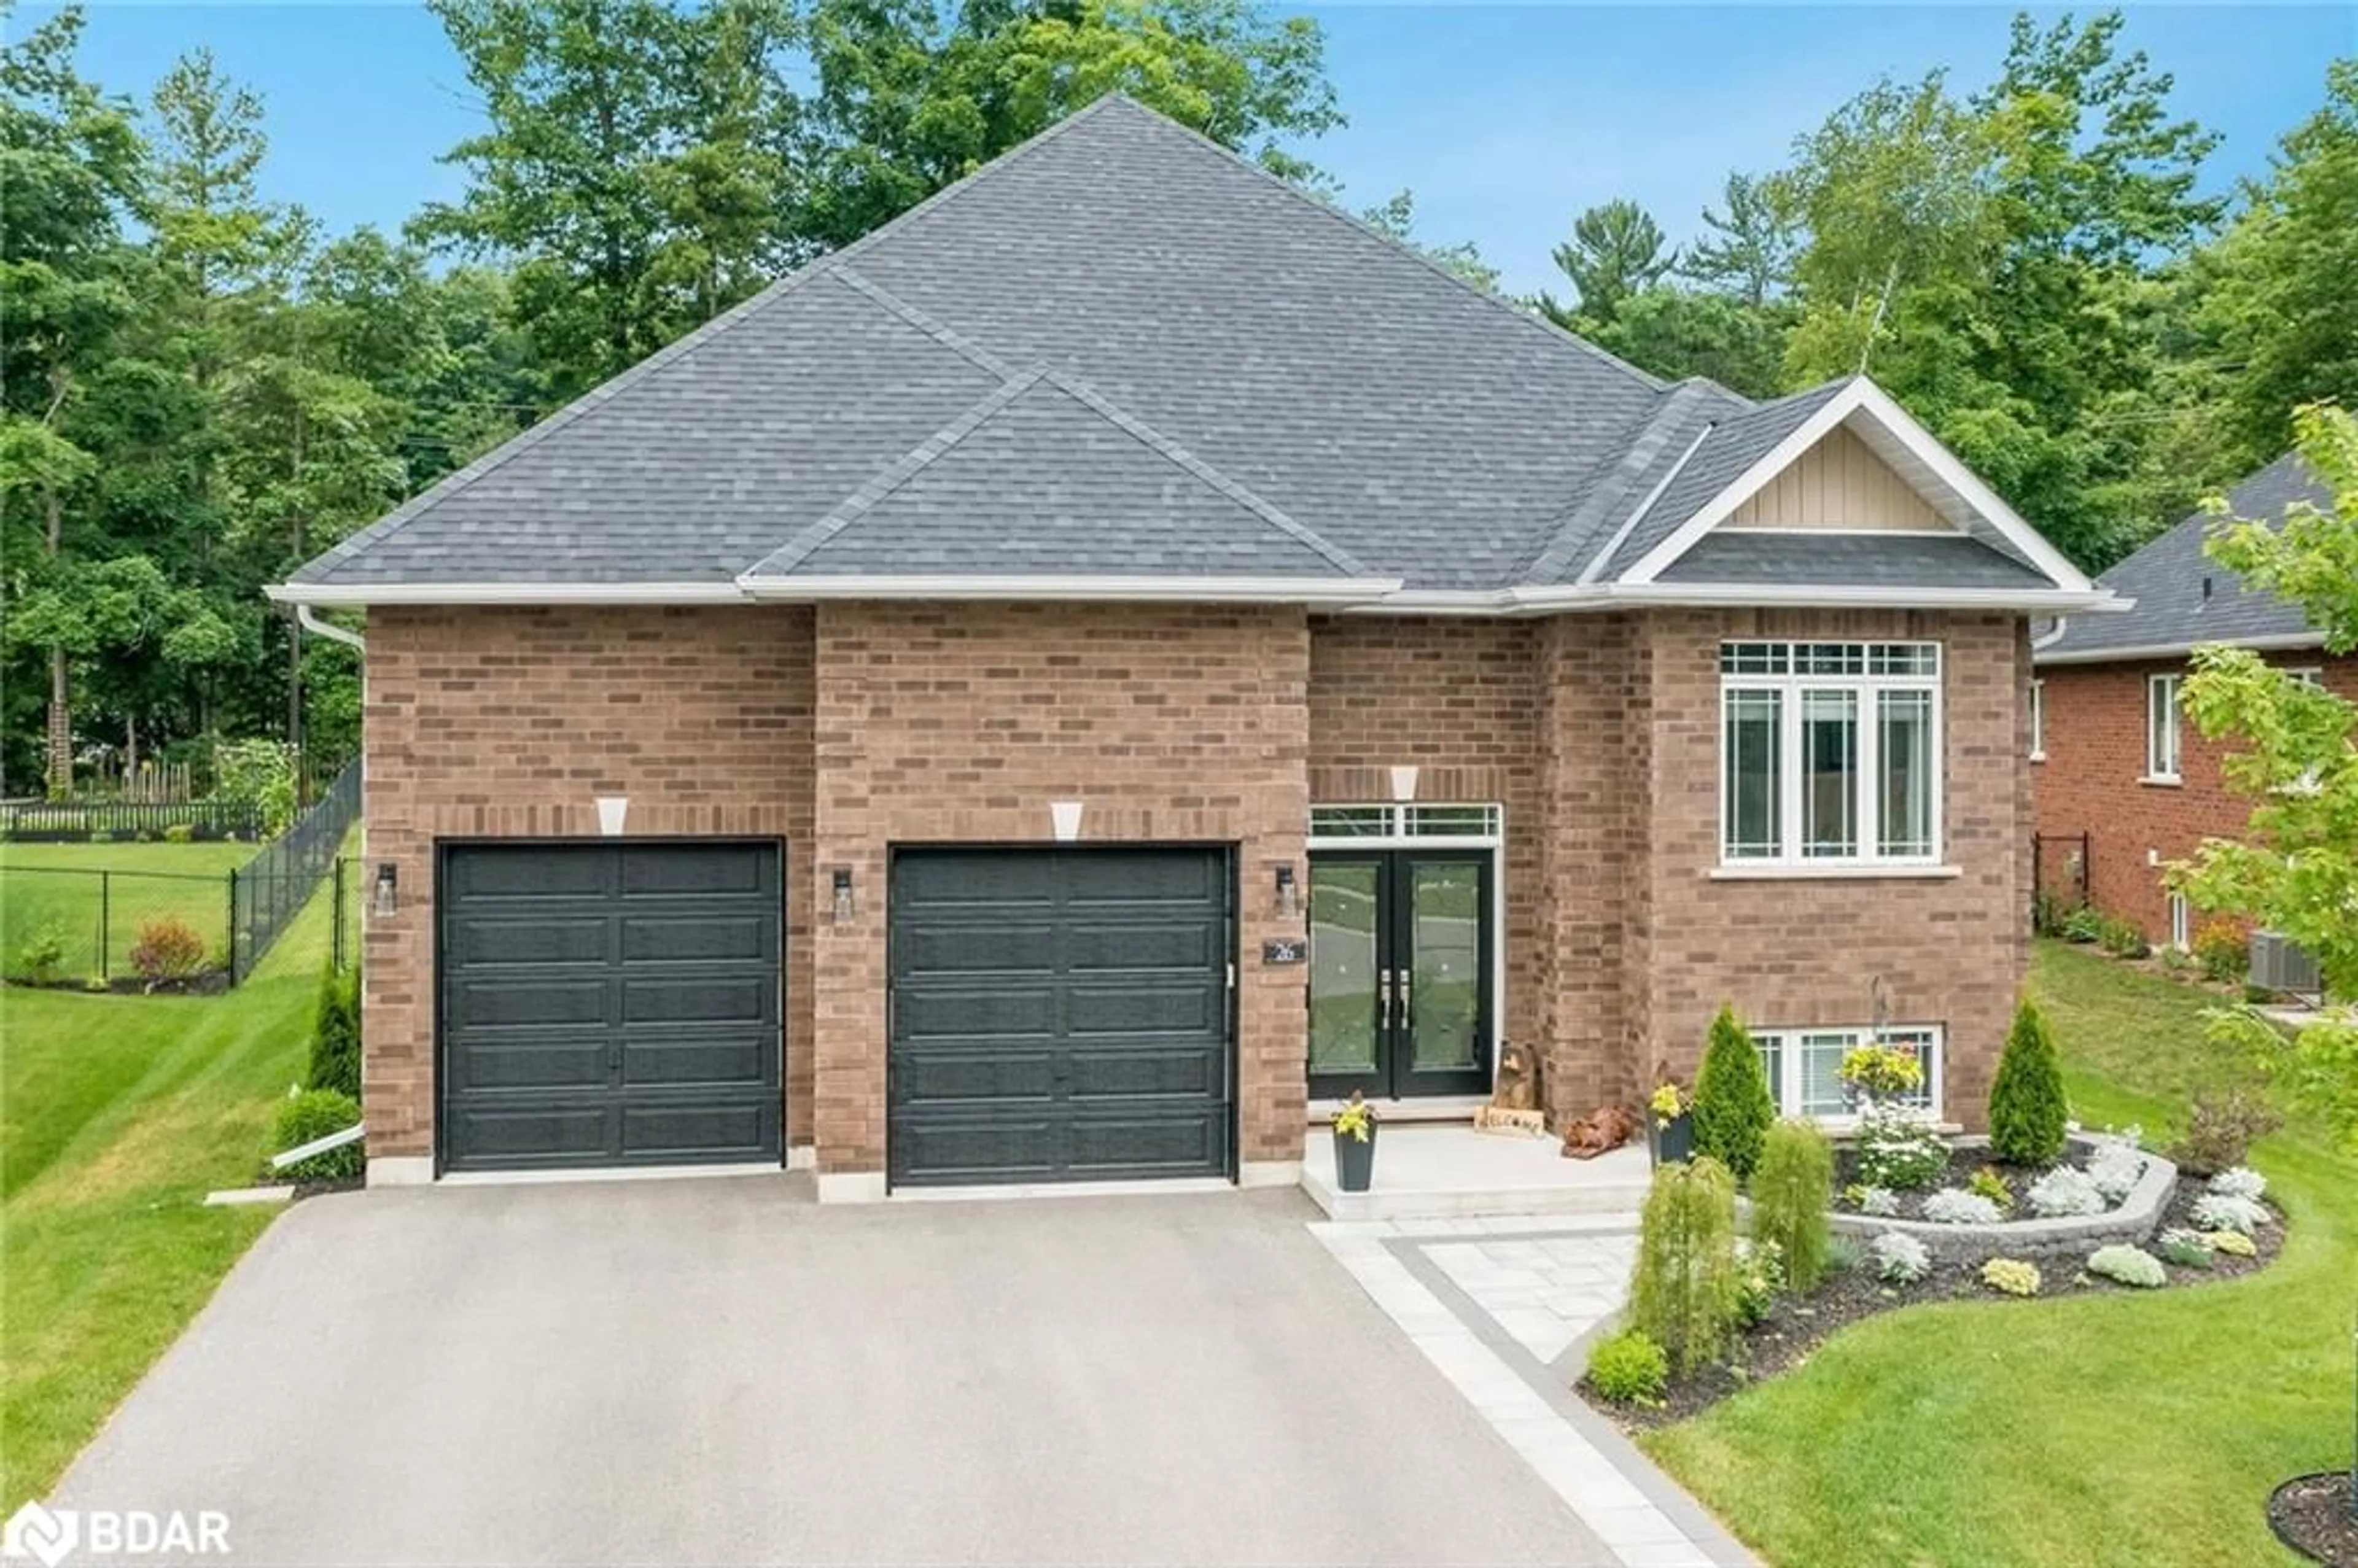 Home with brick exterior material for 26 Natures Trail, Wasaga Beach Ontario L9Z 0H4